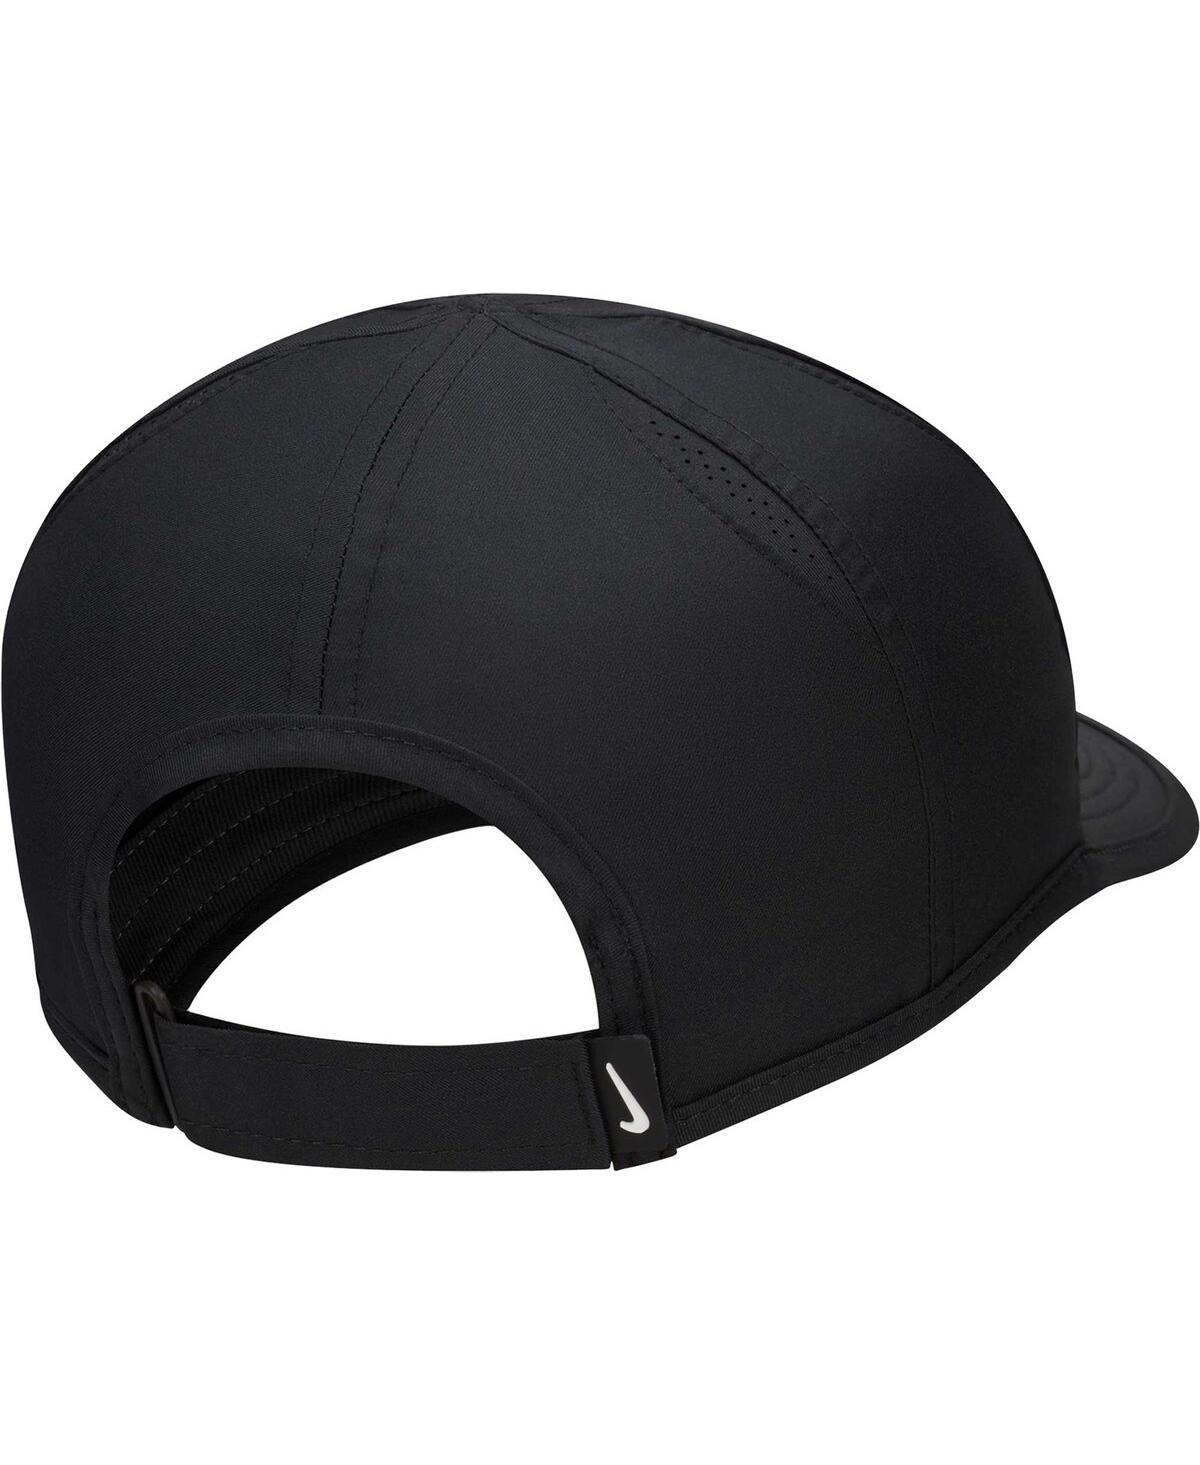 Shop Nike Youth Boys And Girls  Black Featherlight Club Performance Adjustable Hat